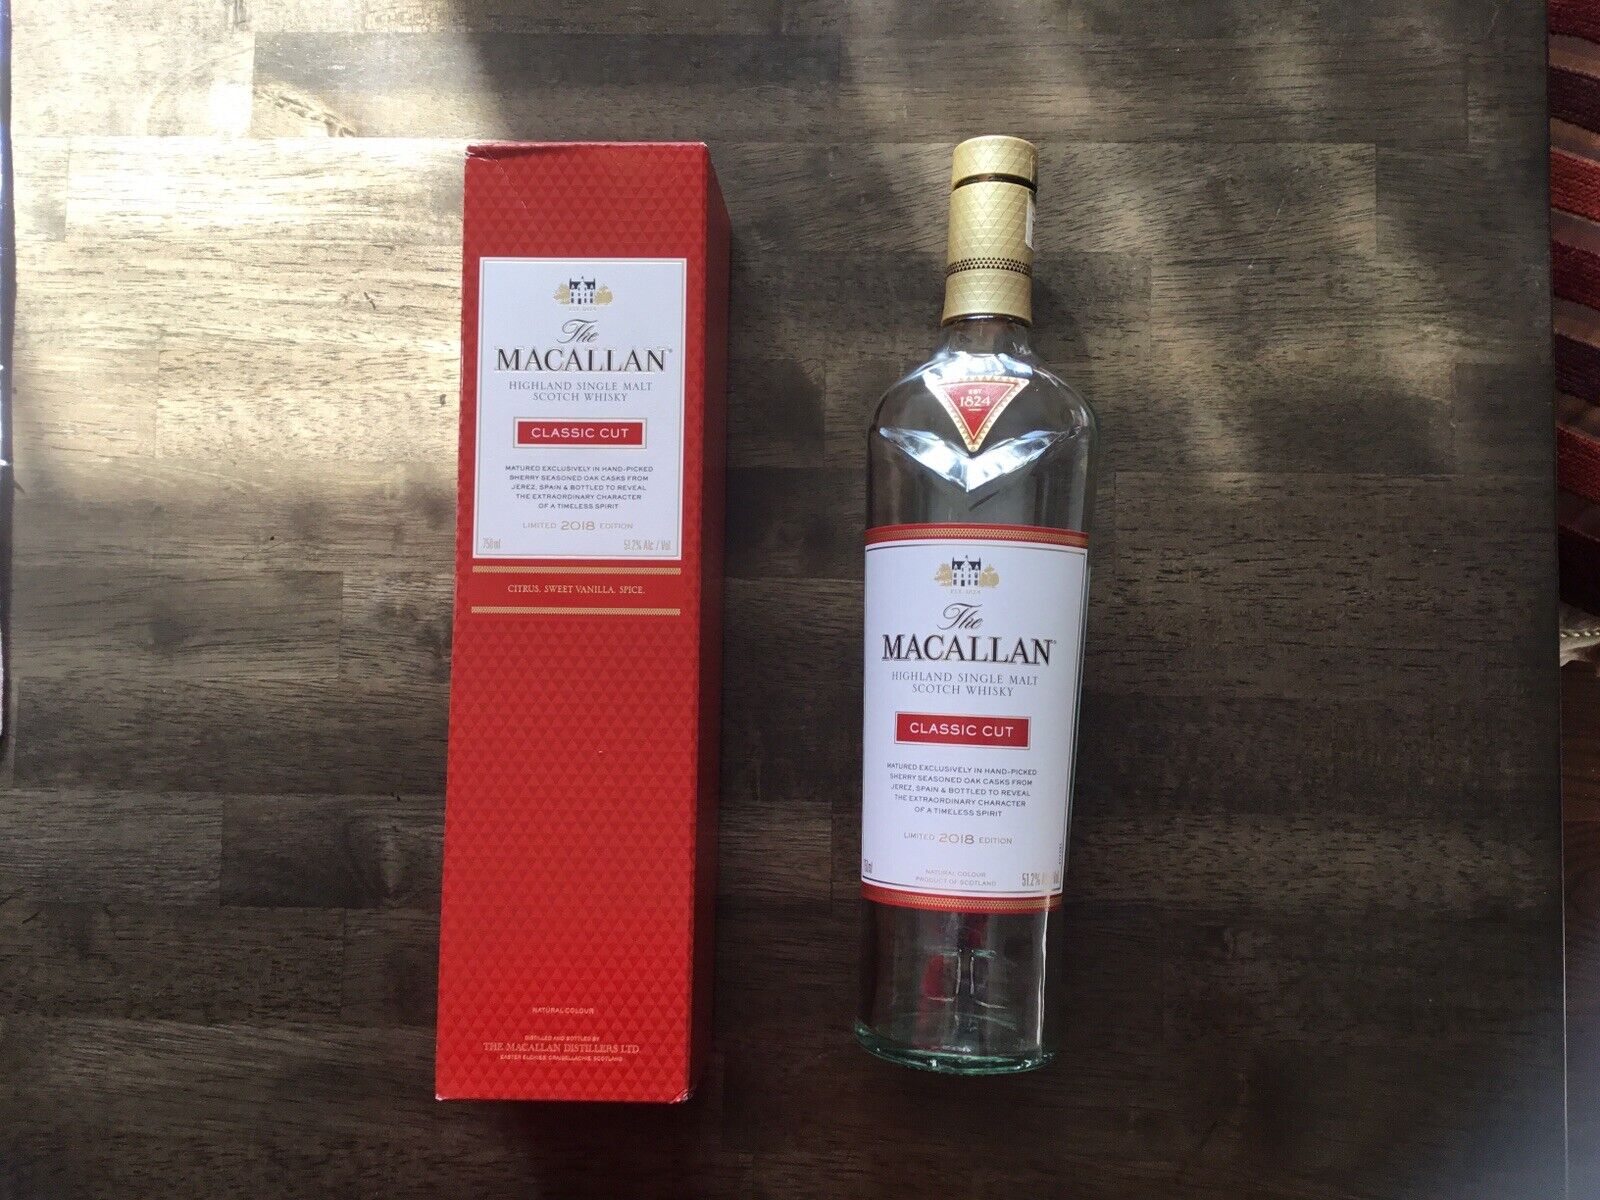 Macallan - Classic Cut 2018 Limited Edition Whisky Empty bottle and box